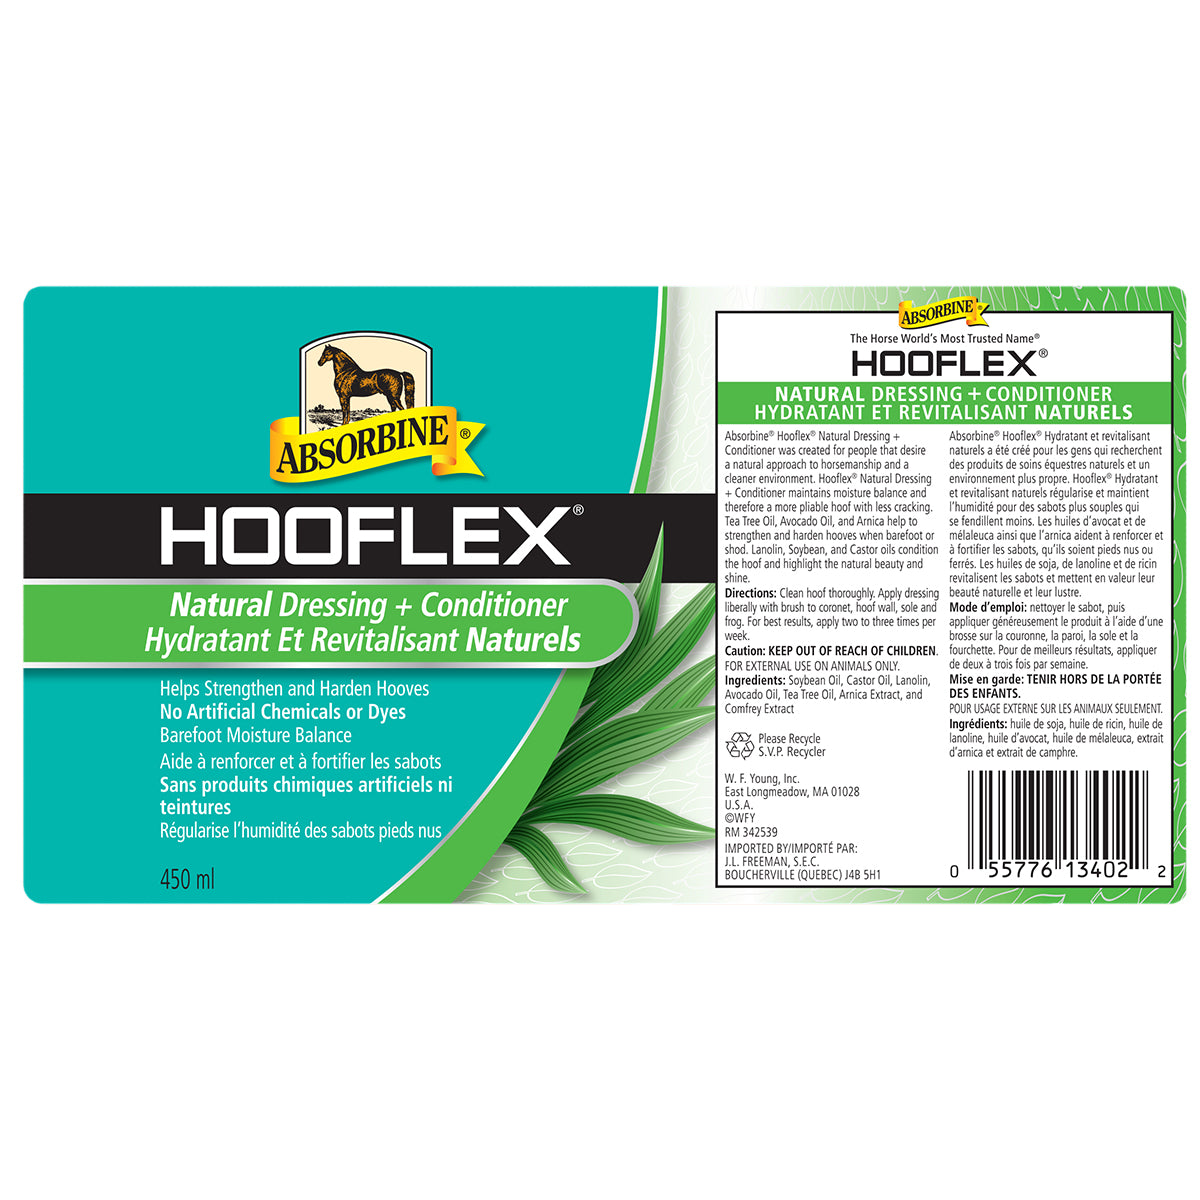 Absorbine Hooflex Natural Dressing and Conditioner label.